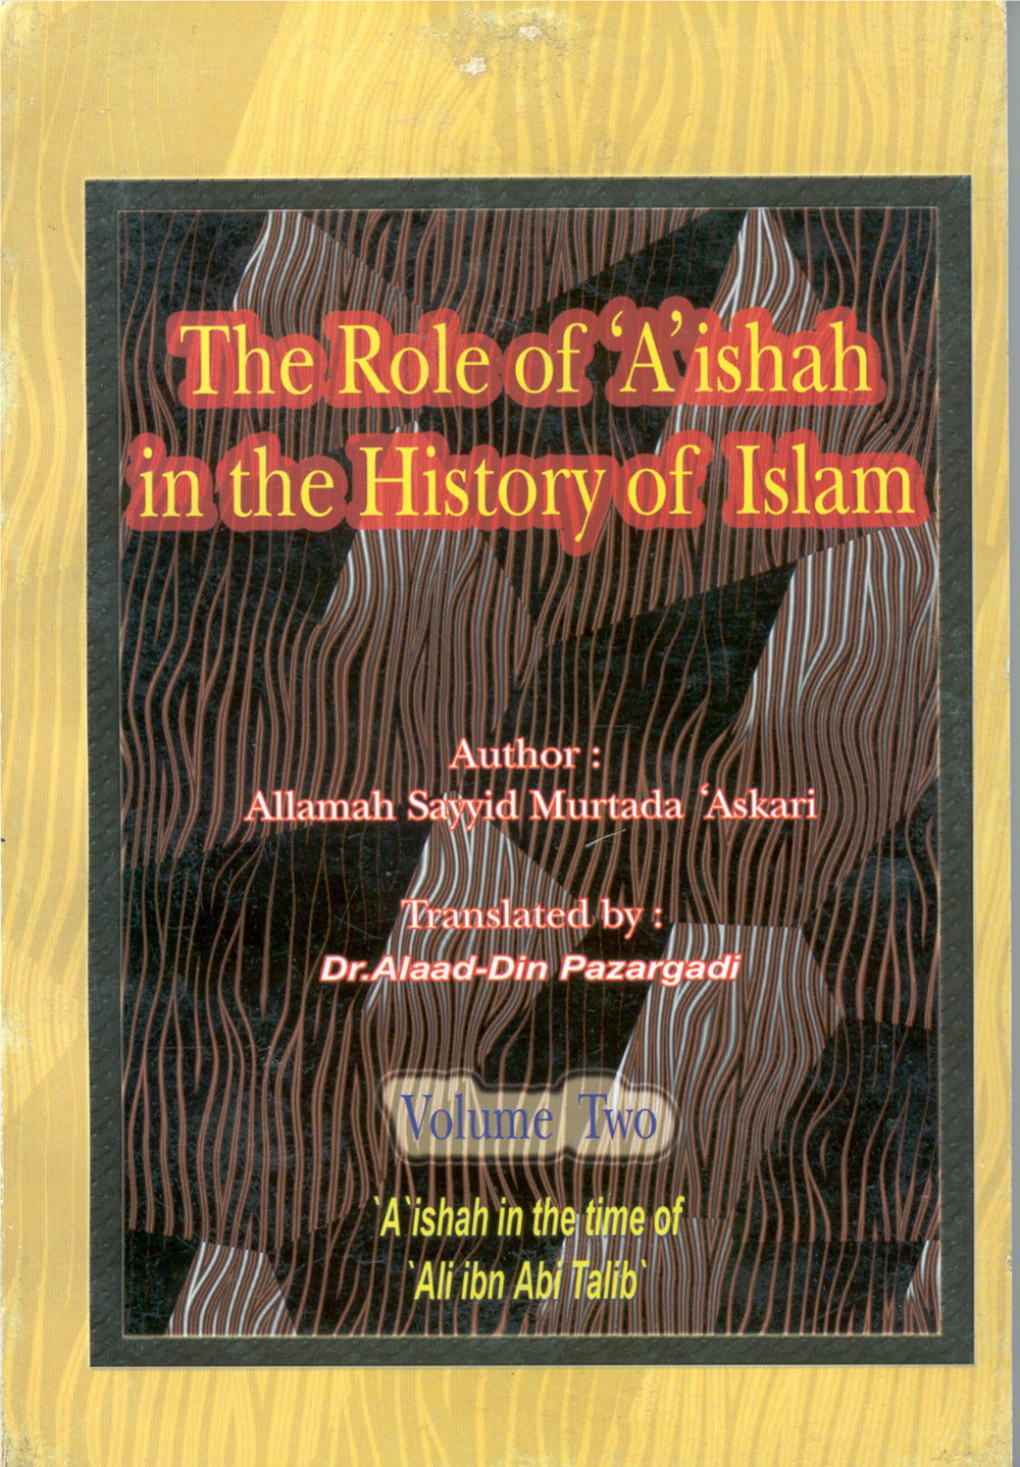 The Role of Aisha in the History – Volume I